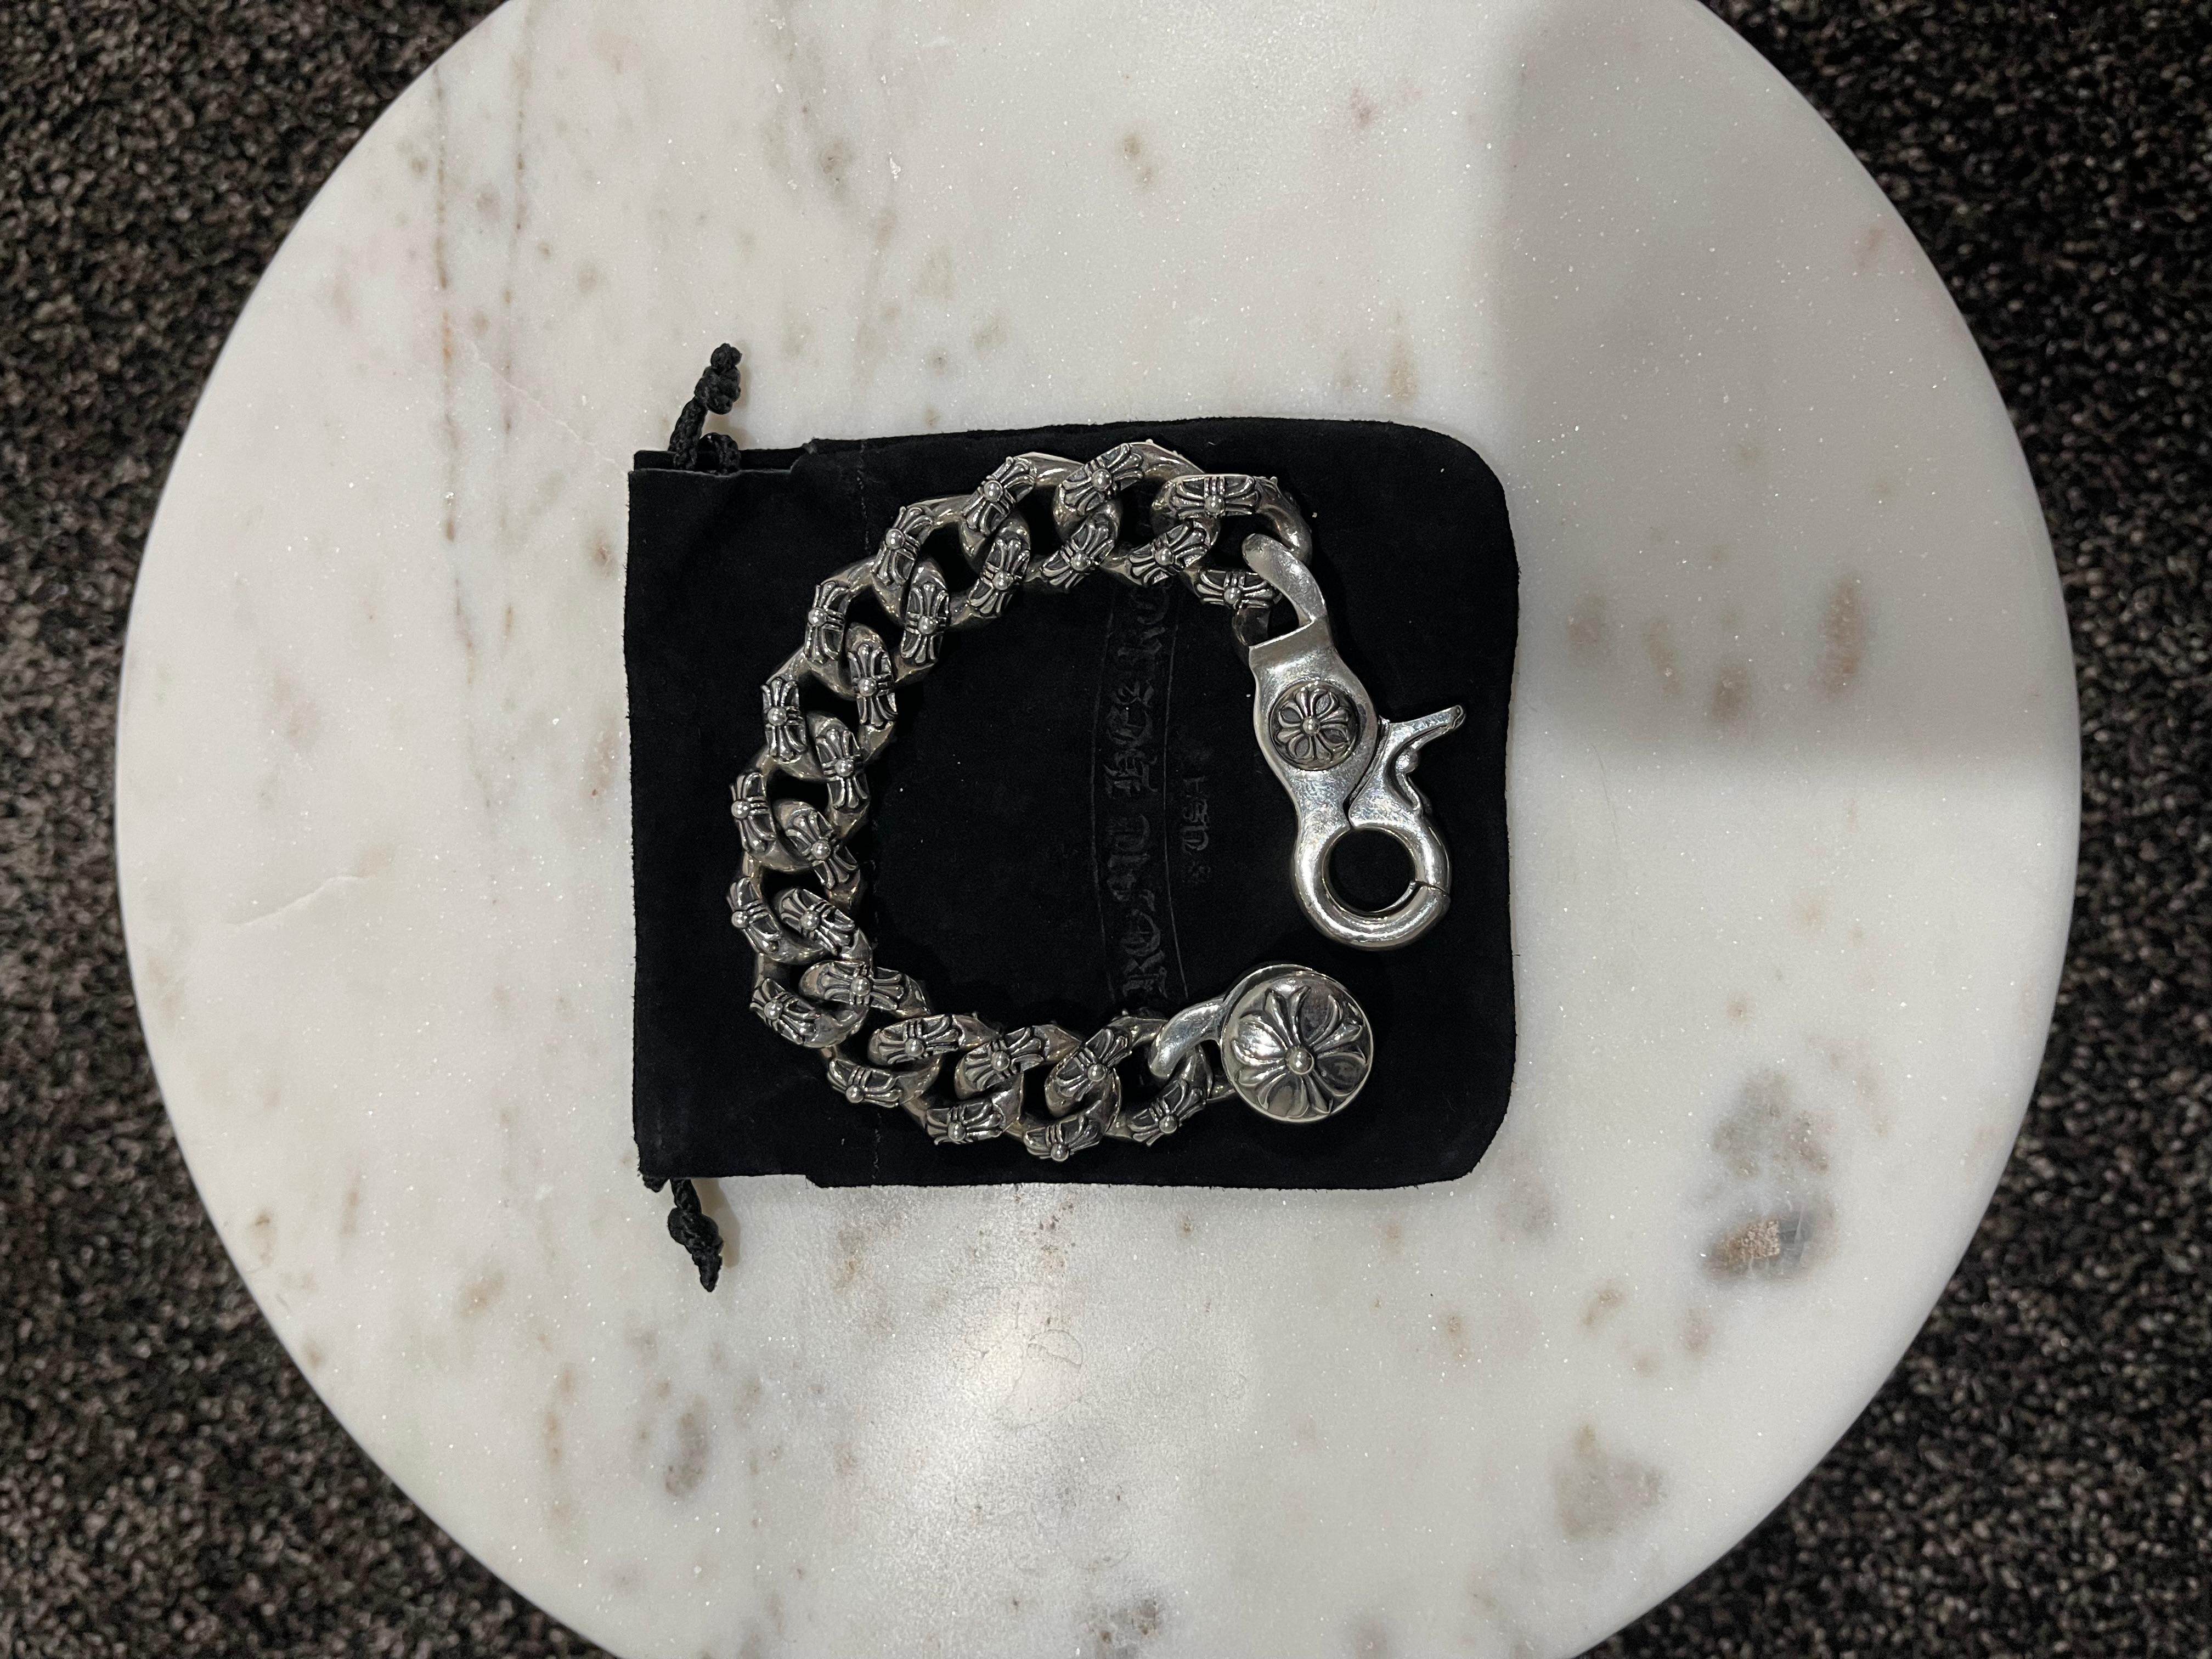 Chrome Hearts Extra Fancy Cuban Link Lobster Clasp Silver Bracelet
excellent condition w/ box and dust bag
Measurements are pictured

Rare Chrome Hearts Heart Bracelet
Well below retail price!

All sales are final.
